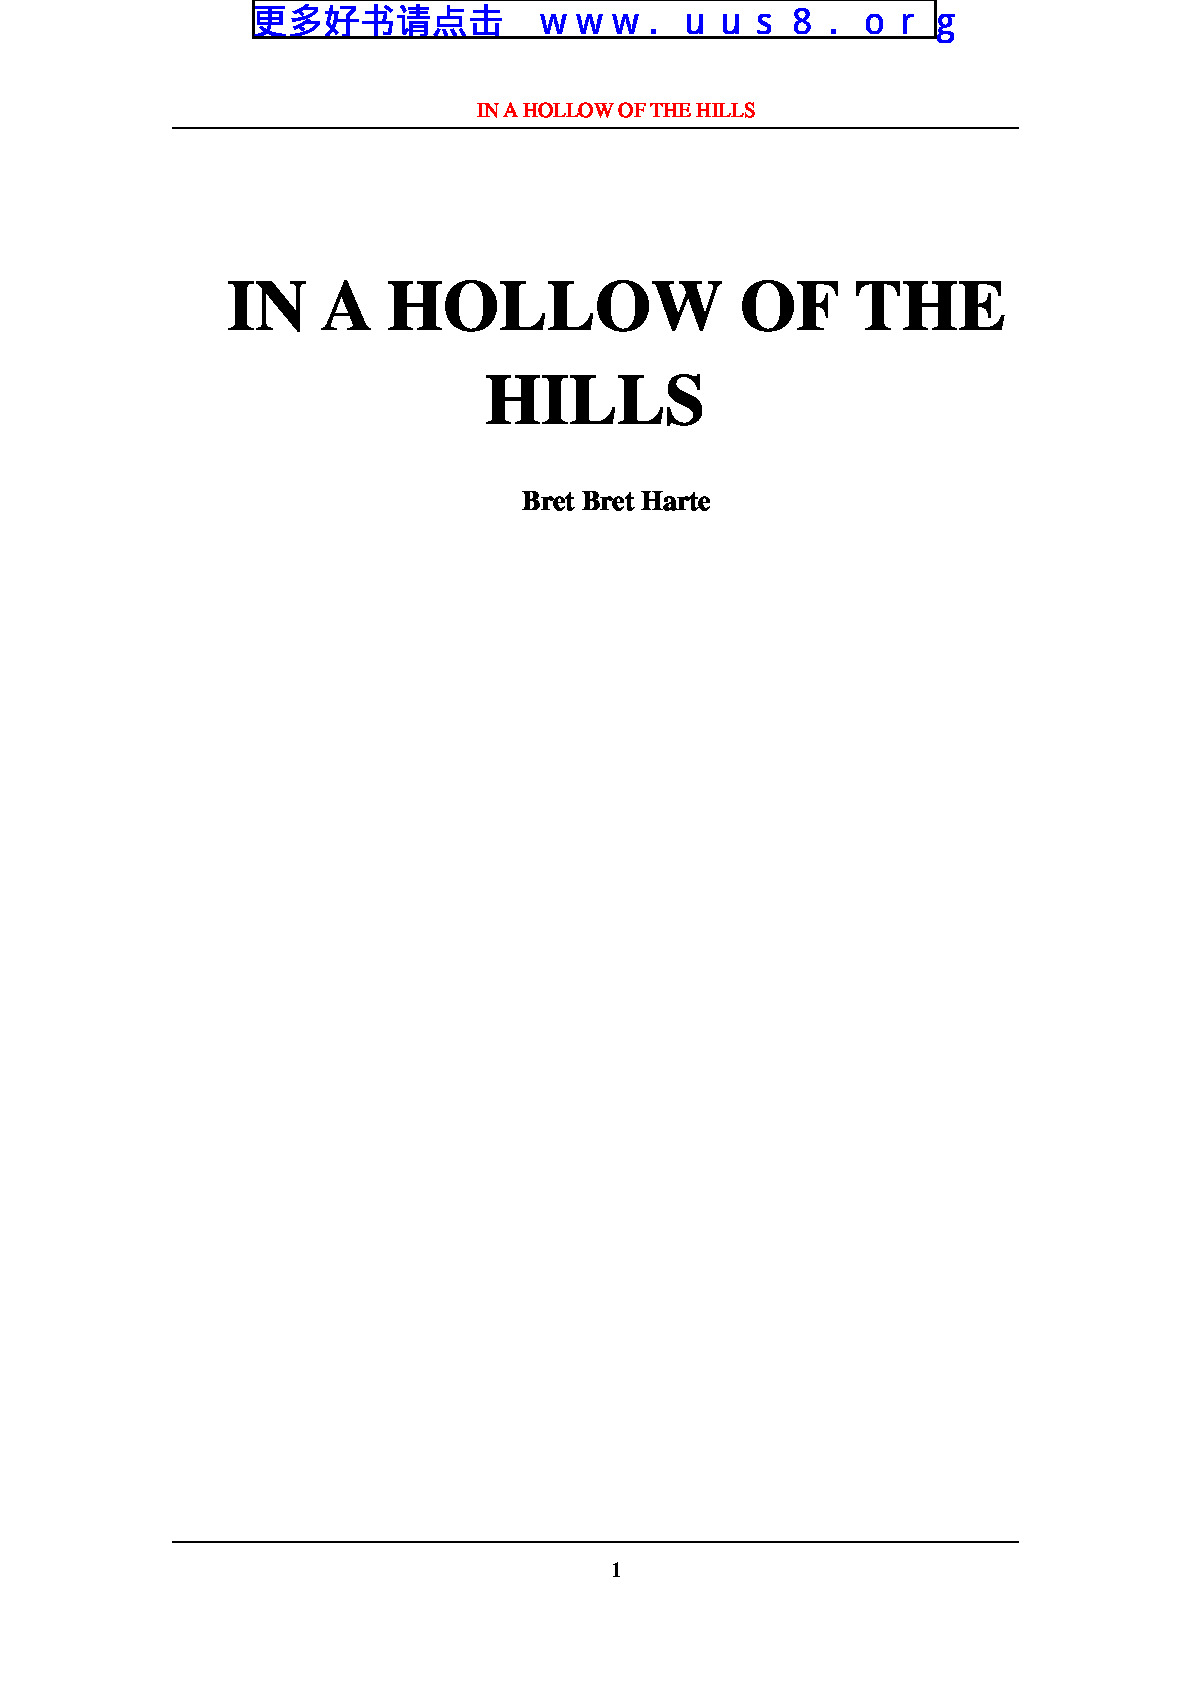 IN_A_HOLLOW_OF_THE_HILLS(山涧)